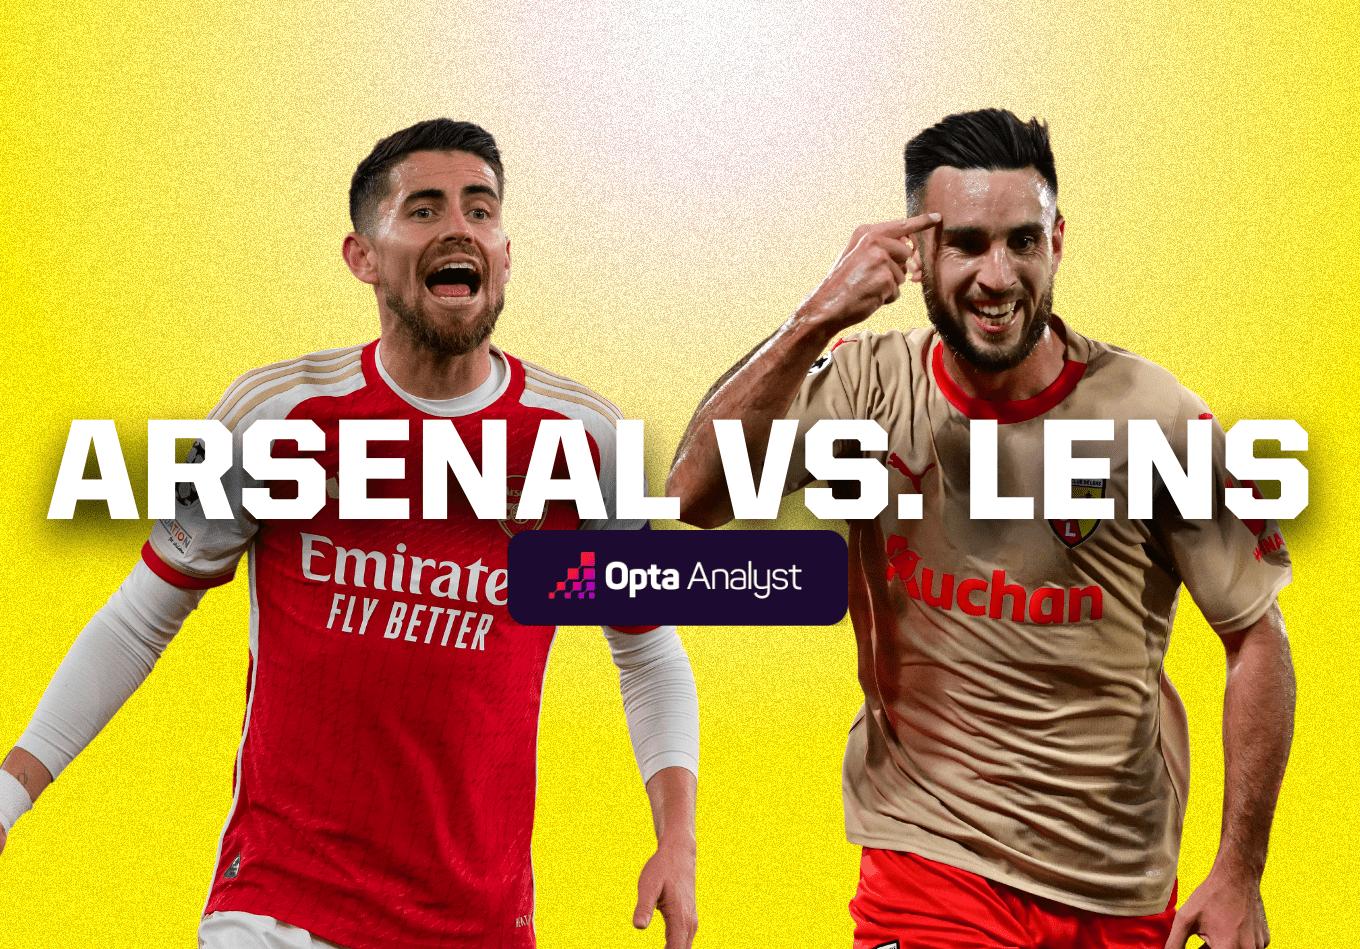 Arsenal vs Lens: Prediction and Preview